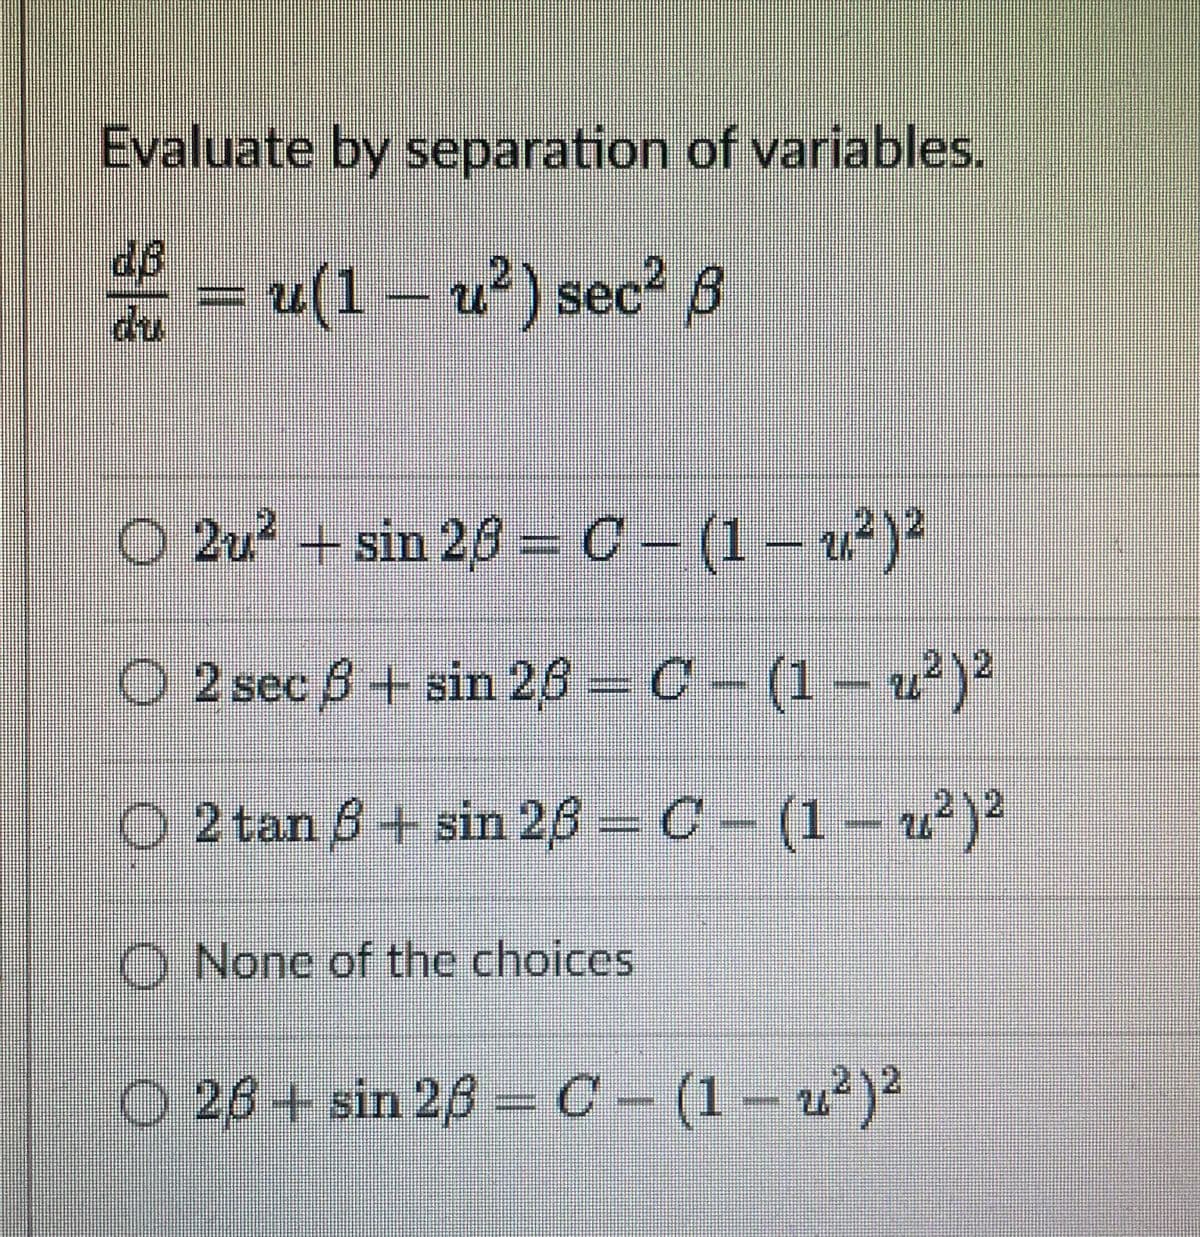 Evaluate by separation of variables.
= u(1 – u?) sec? B
du
O 2u + sin 26 = C – (1 – u²)²
2 sec 8+ sin 26 =C- (1– u²)²
O 2 tan 8 + sin 26 C- (1– u²)²
O None of the choices
212
O 26 + sin 28 = C - (1 – u²)²
